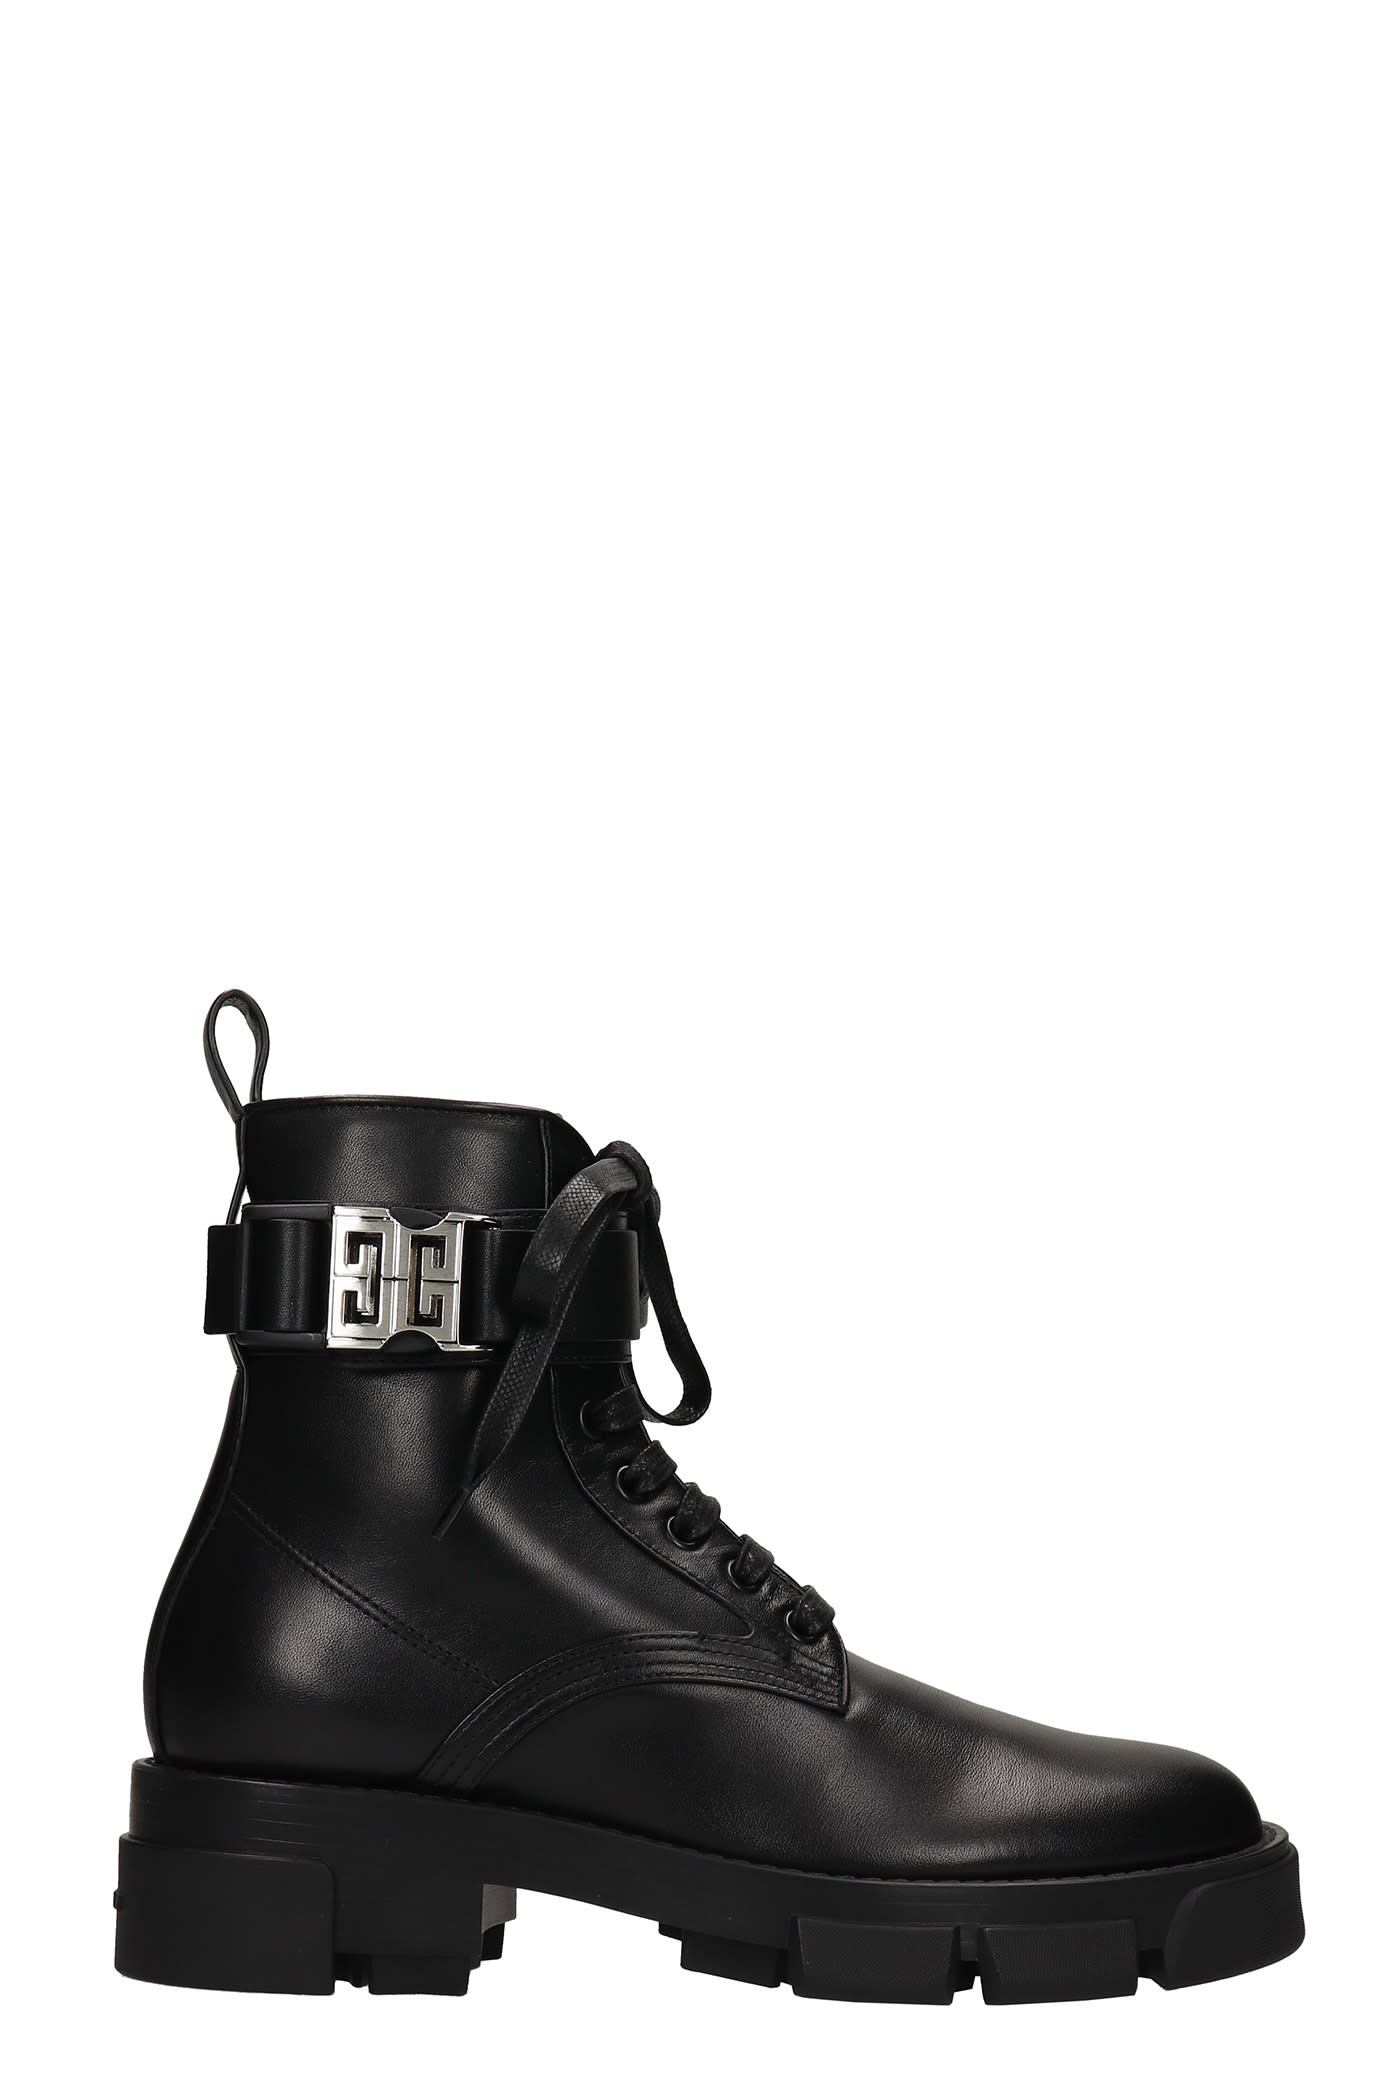 givenchy combat combat boots in black leather